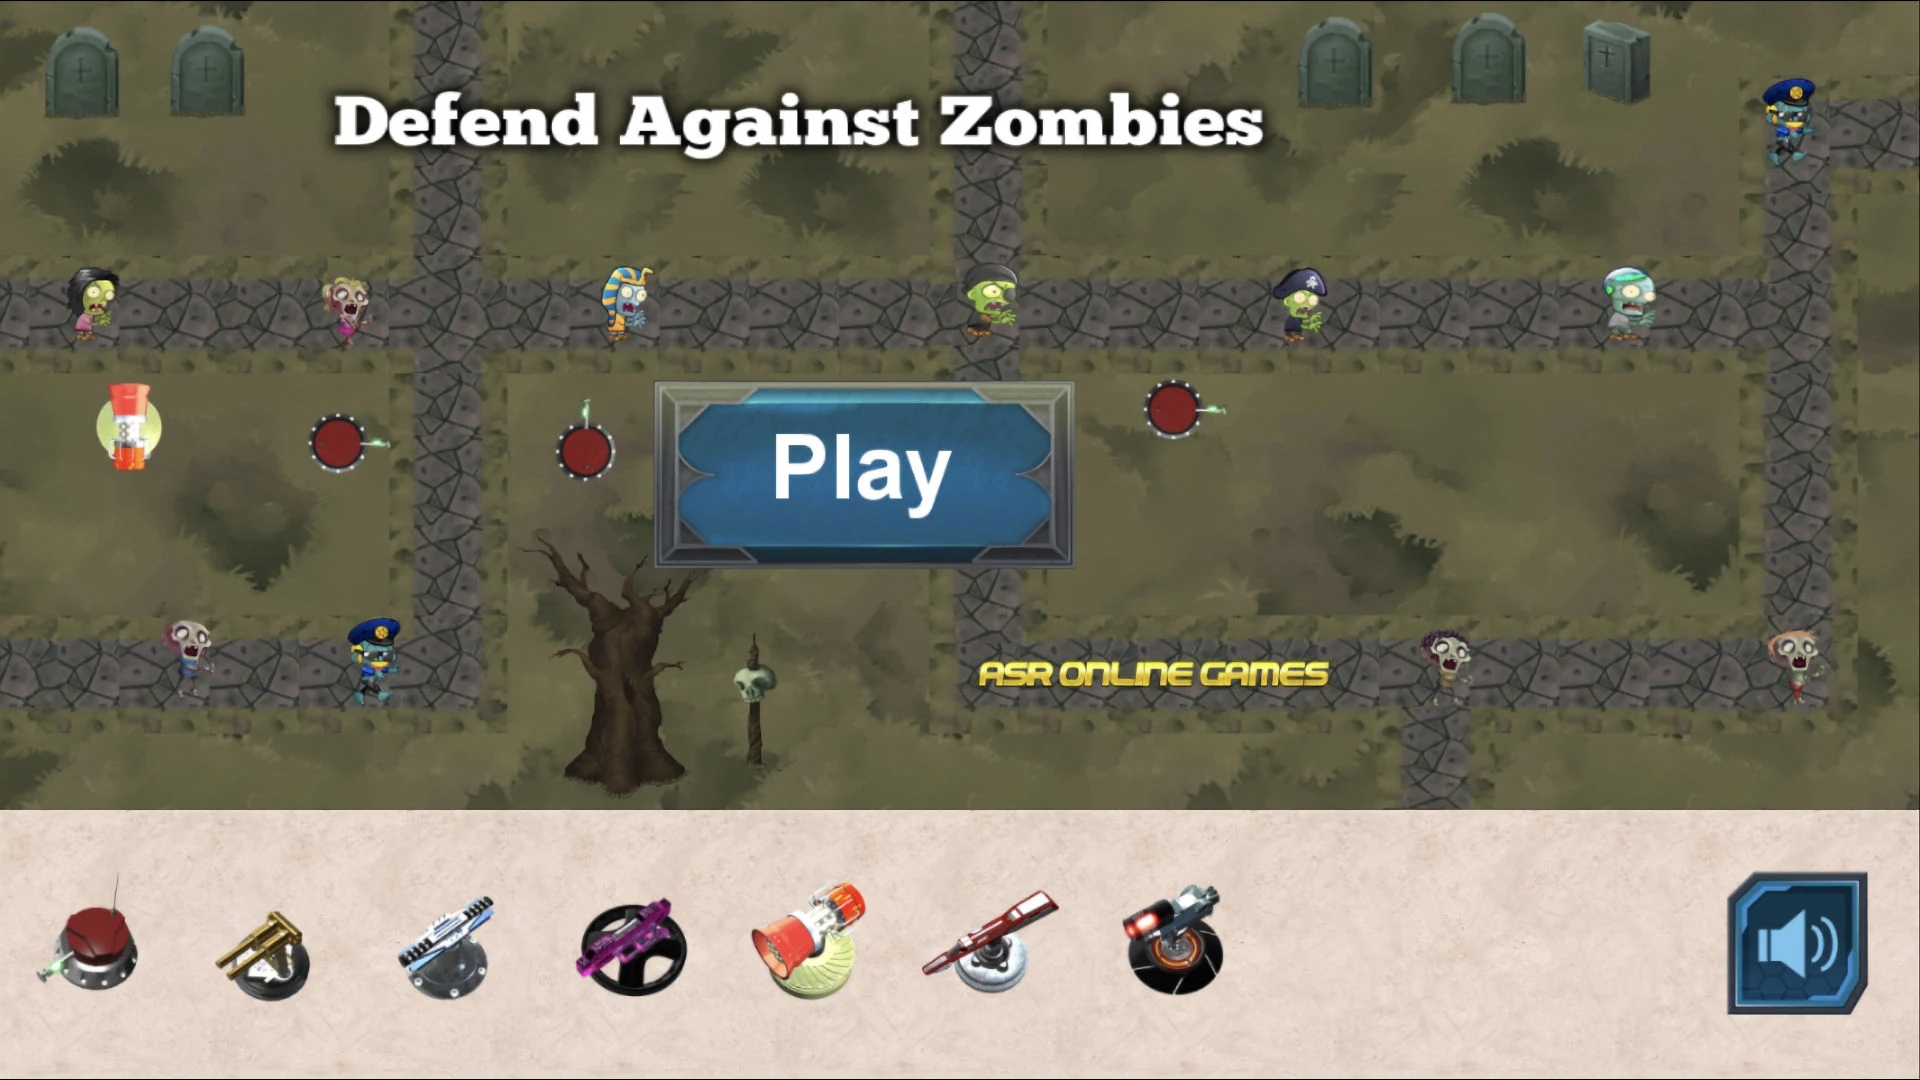 Defend Against Zombies